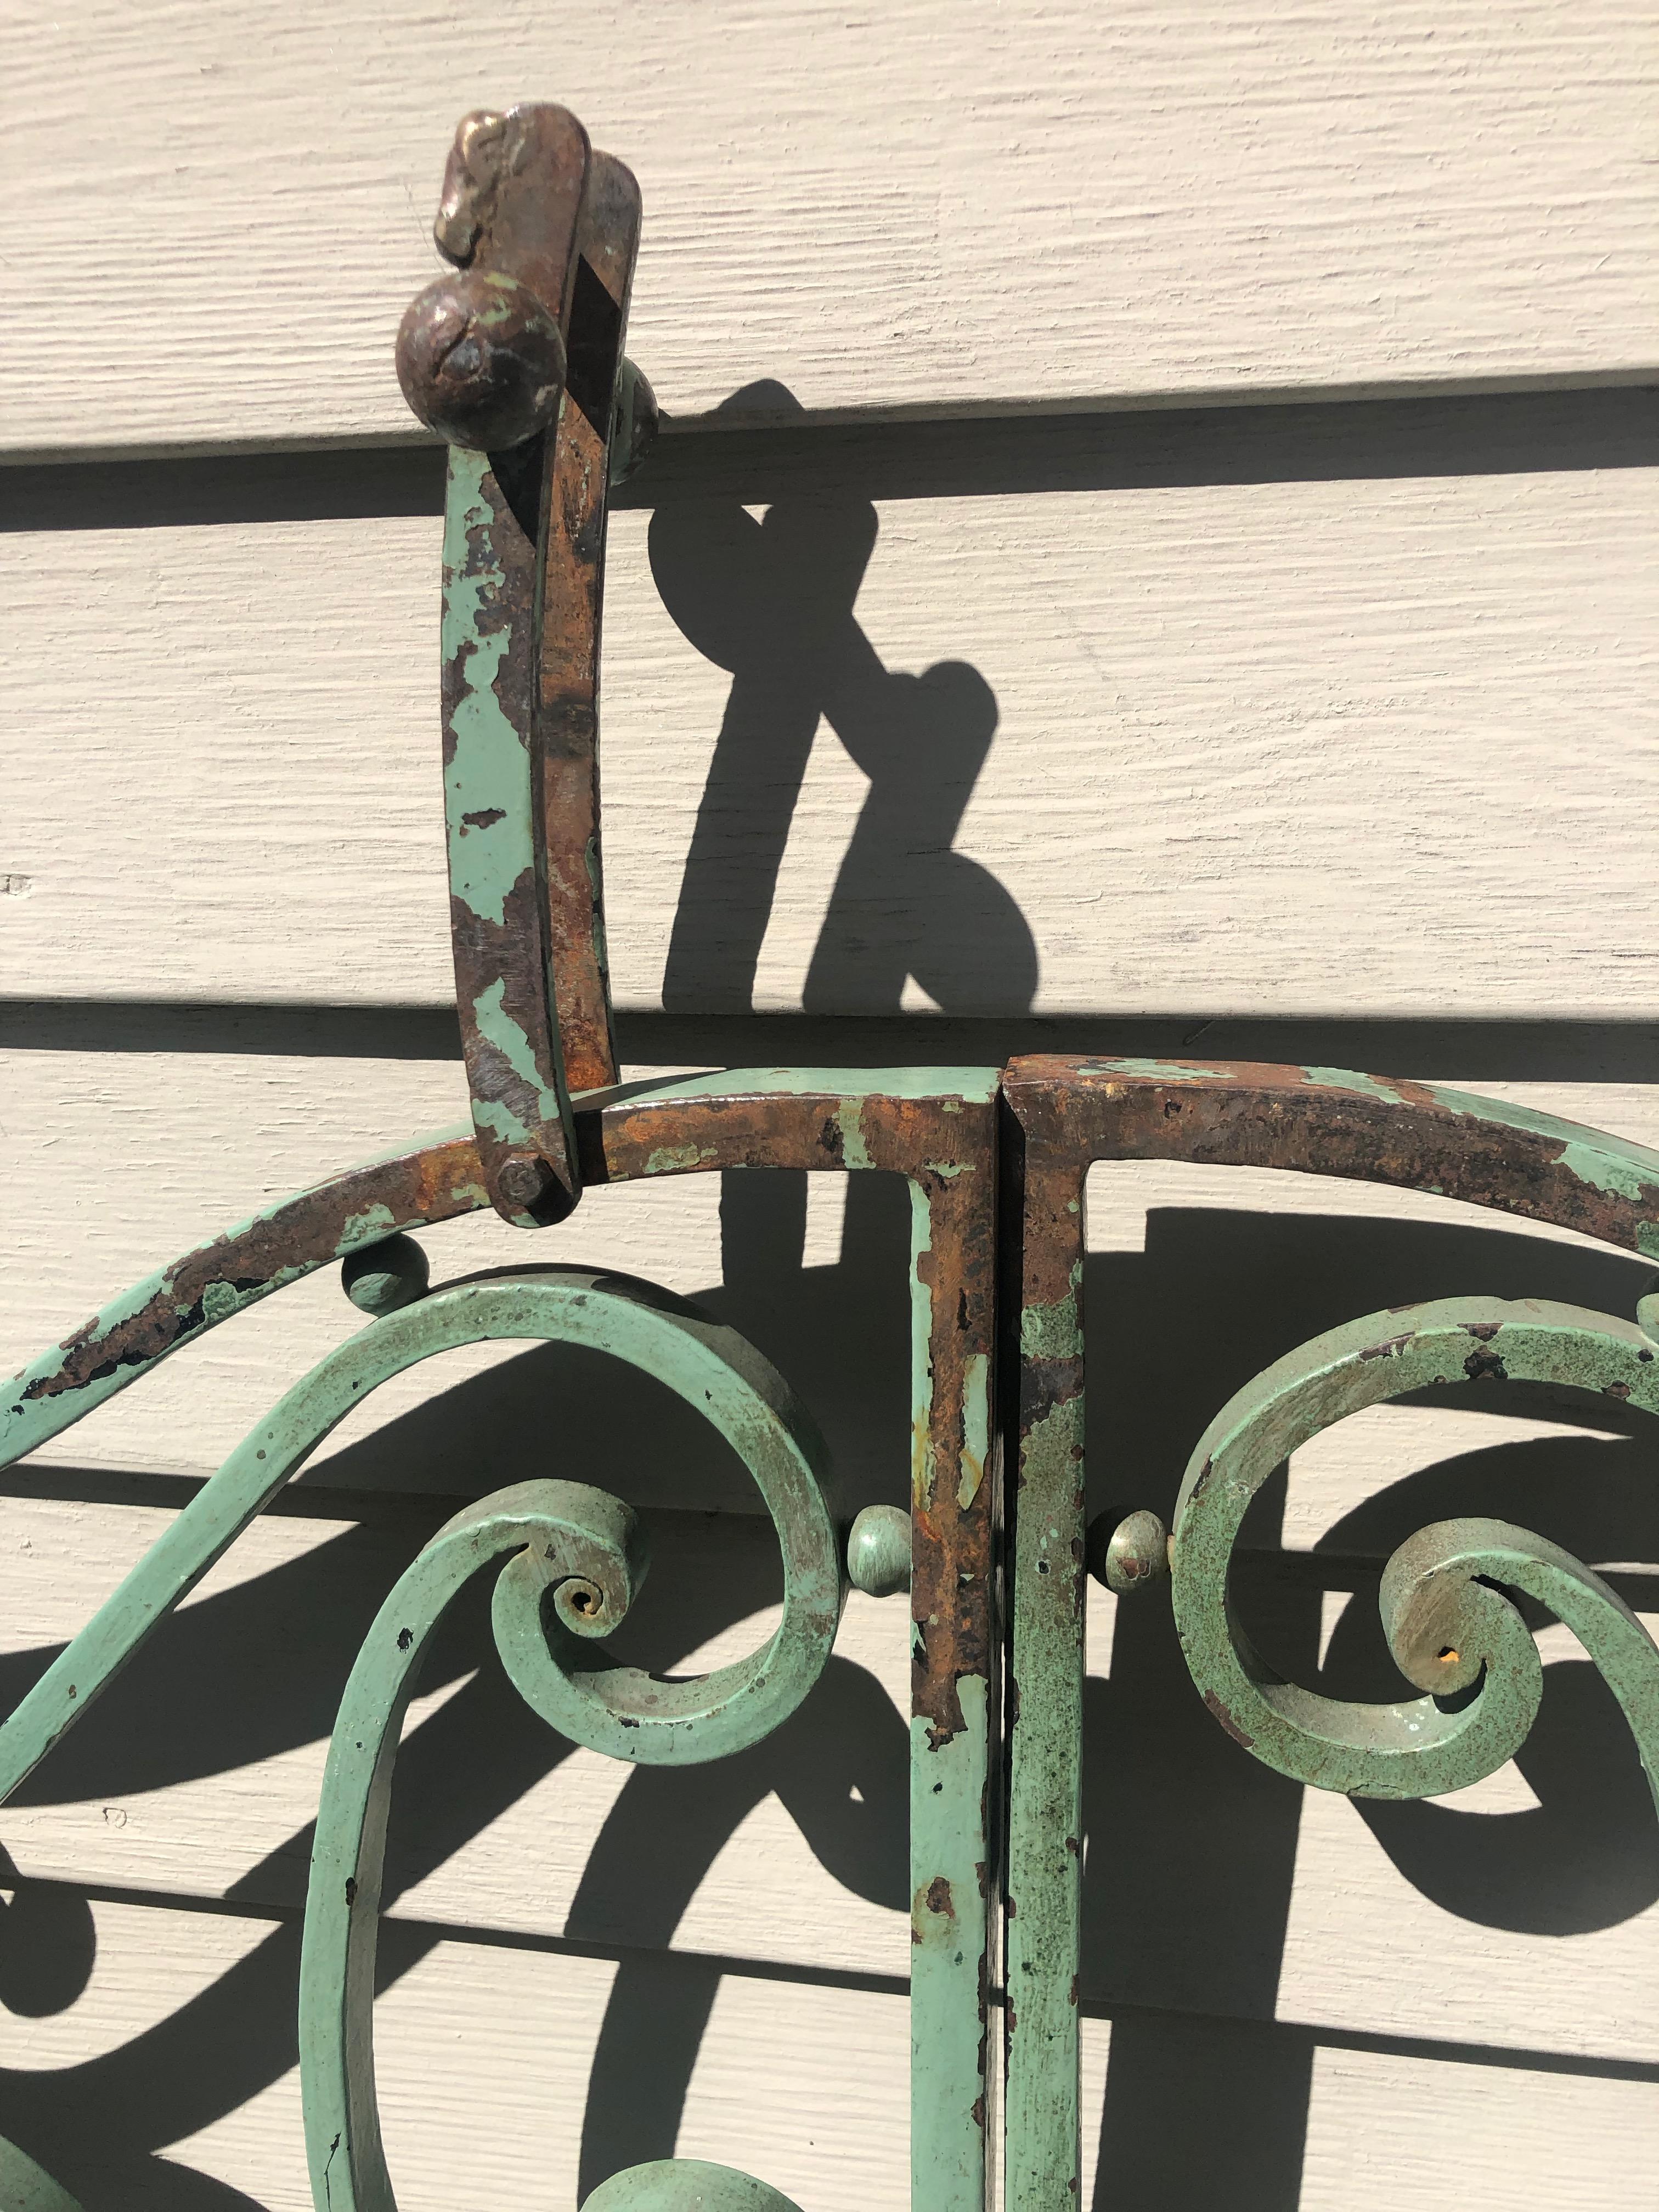 Pair of French Wrought Iron Beaux Arts-Style Gates with Mounting Hardware #1 4